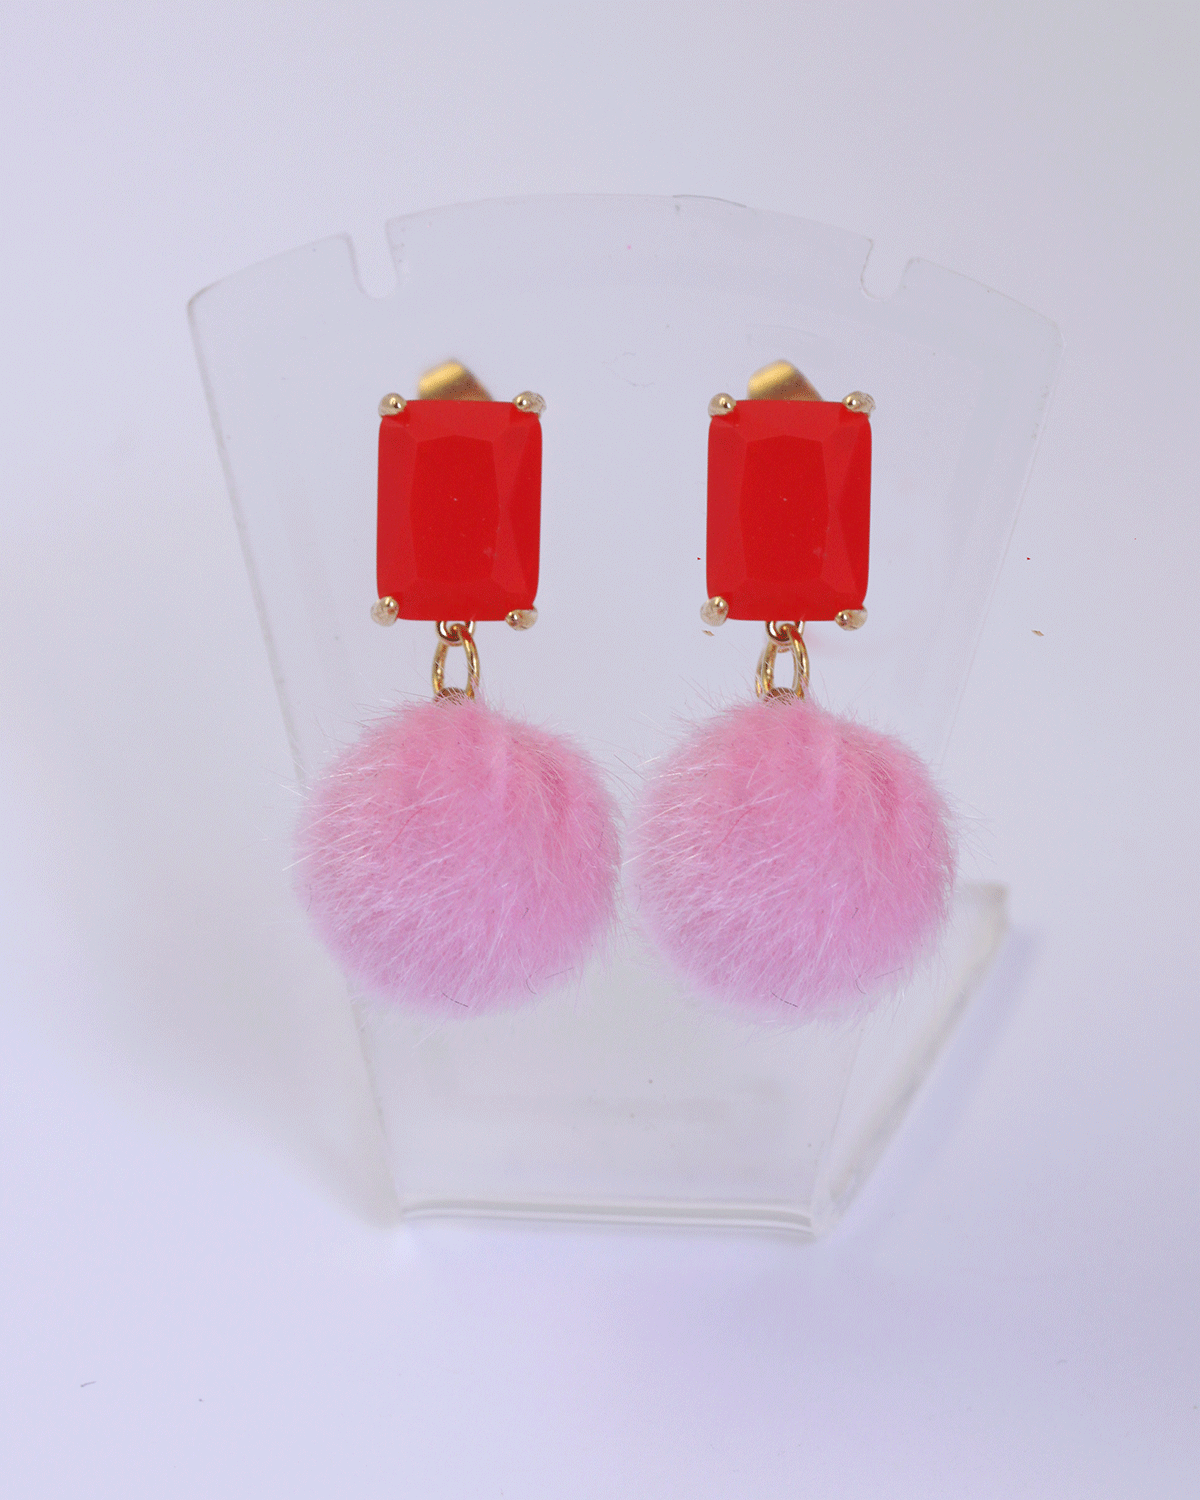 pink pompom and red stud earrings